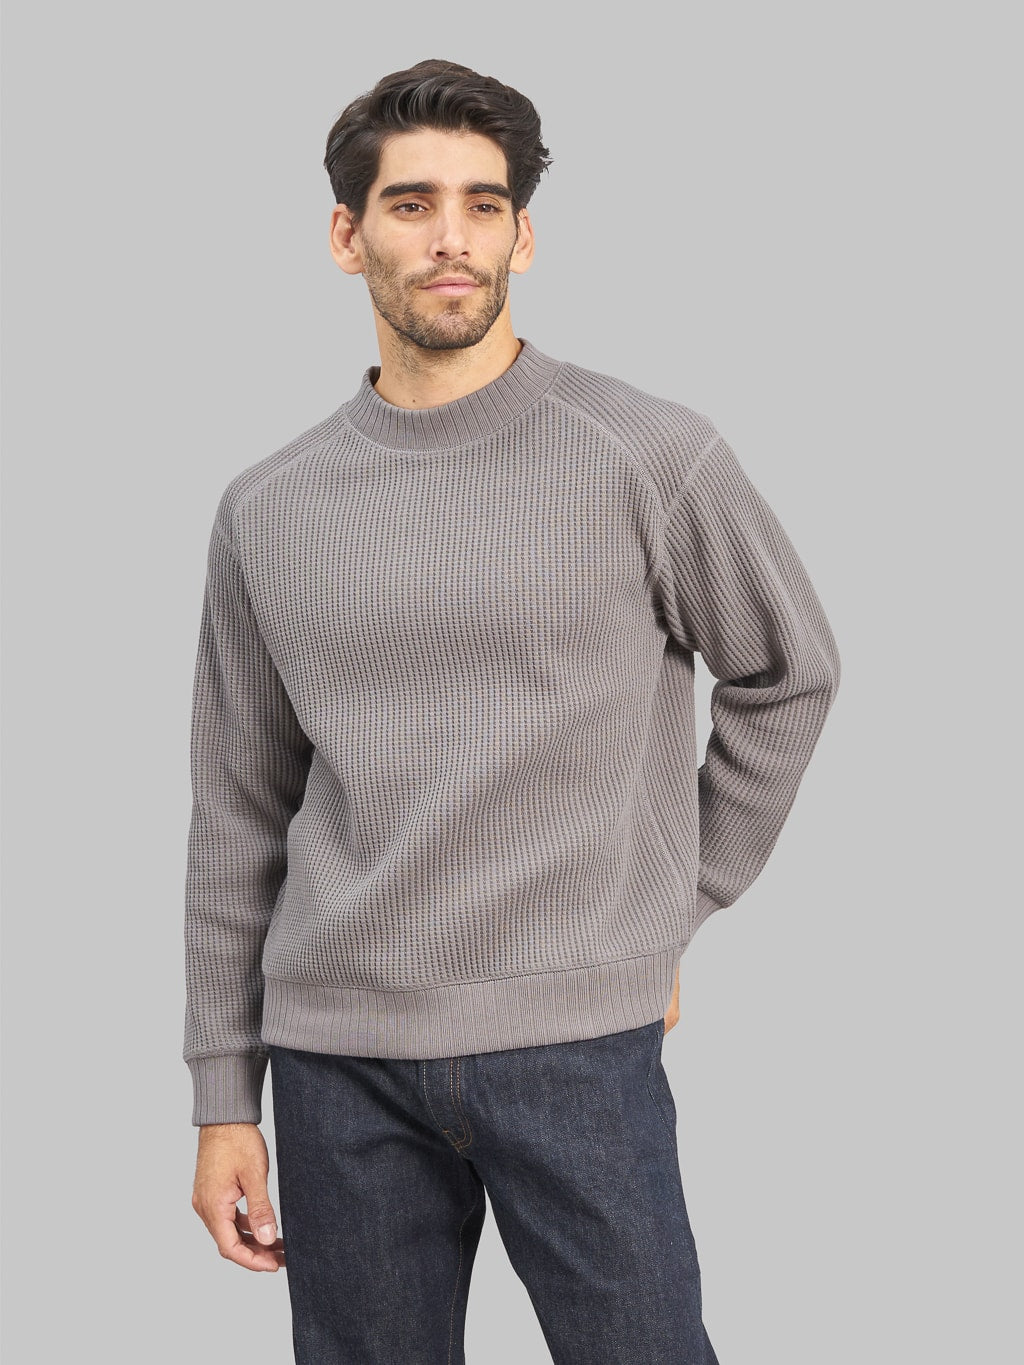 Jackman Waffle Midneck Sweater Iron Grey model front fit